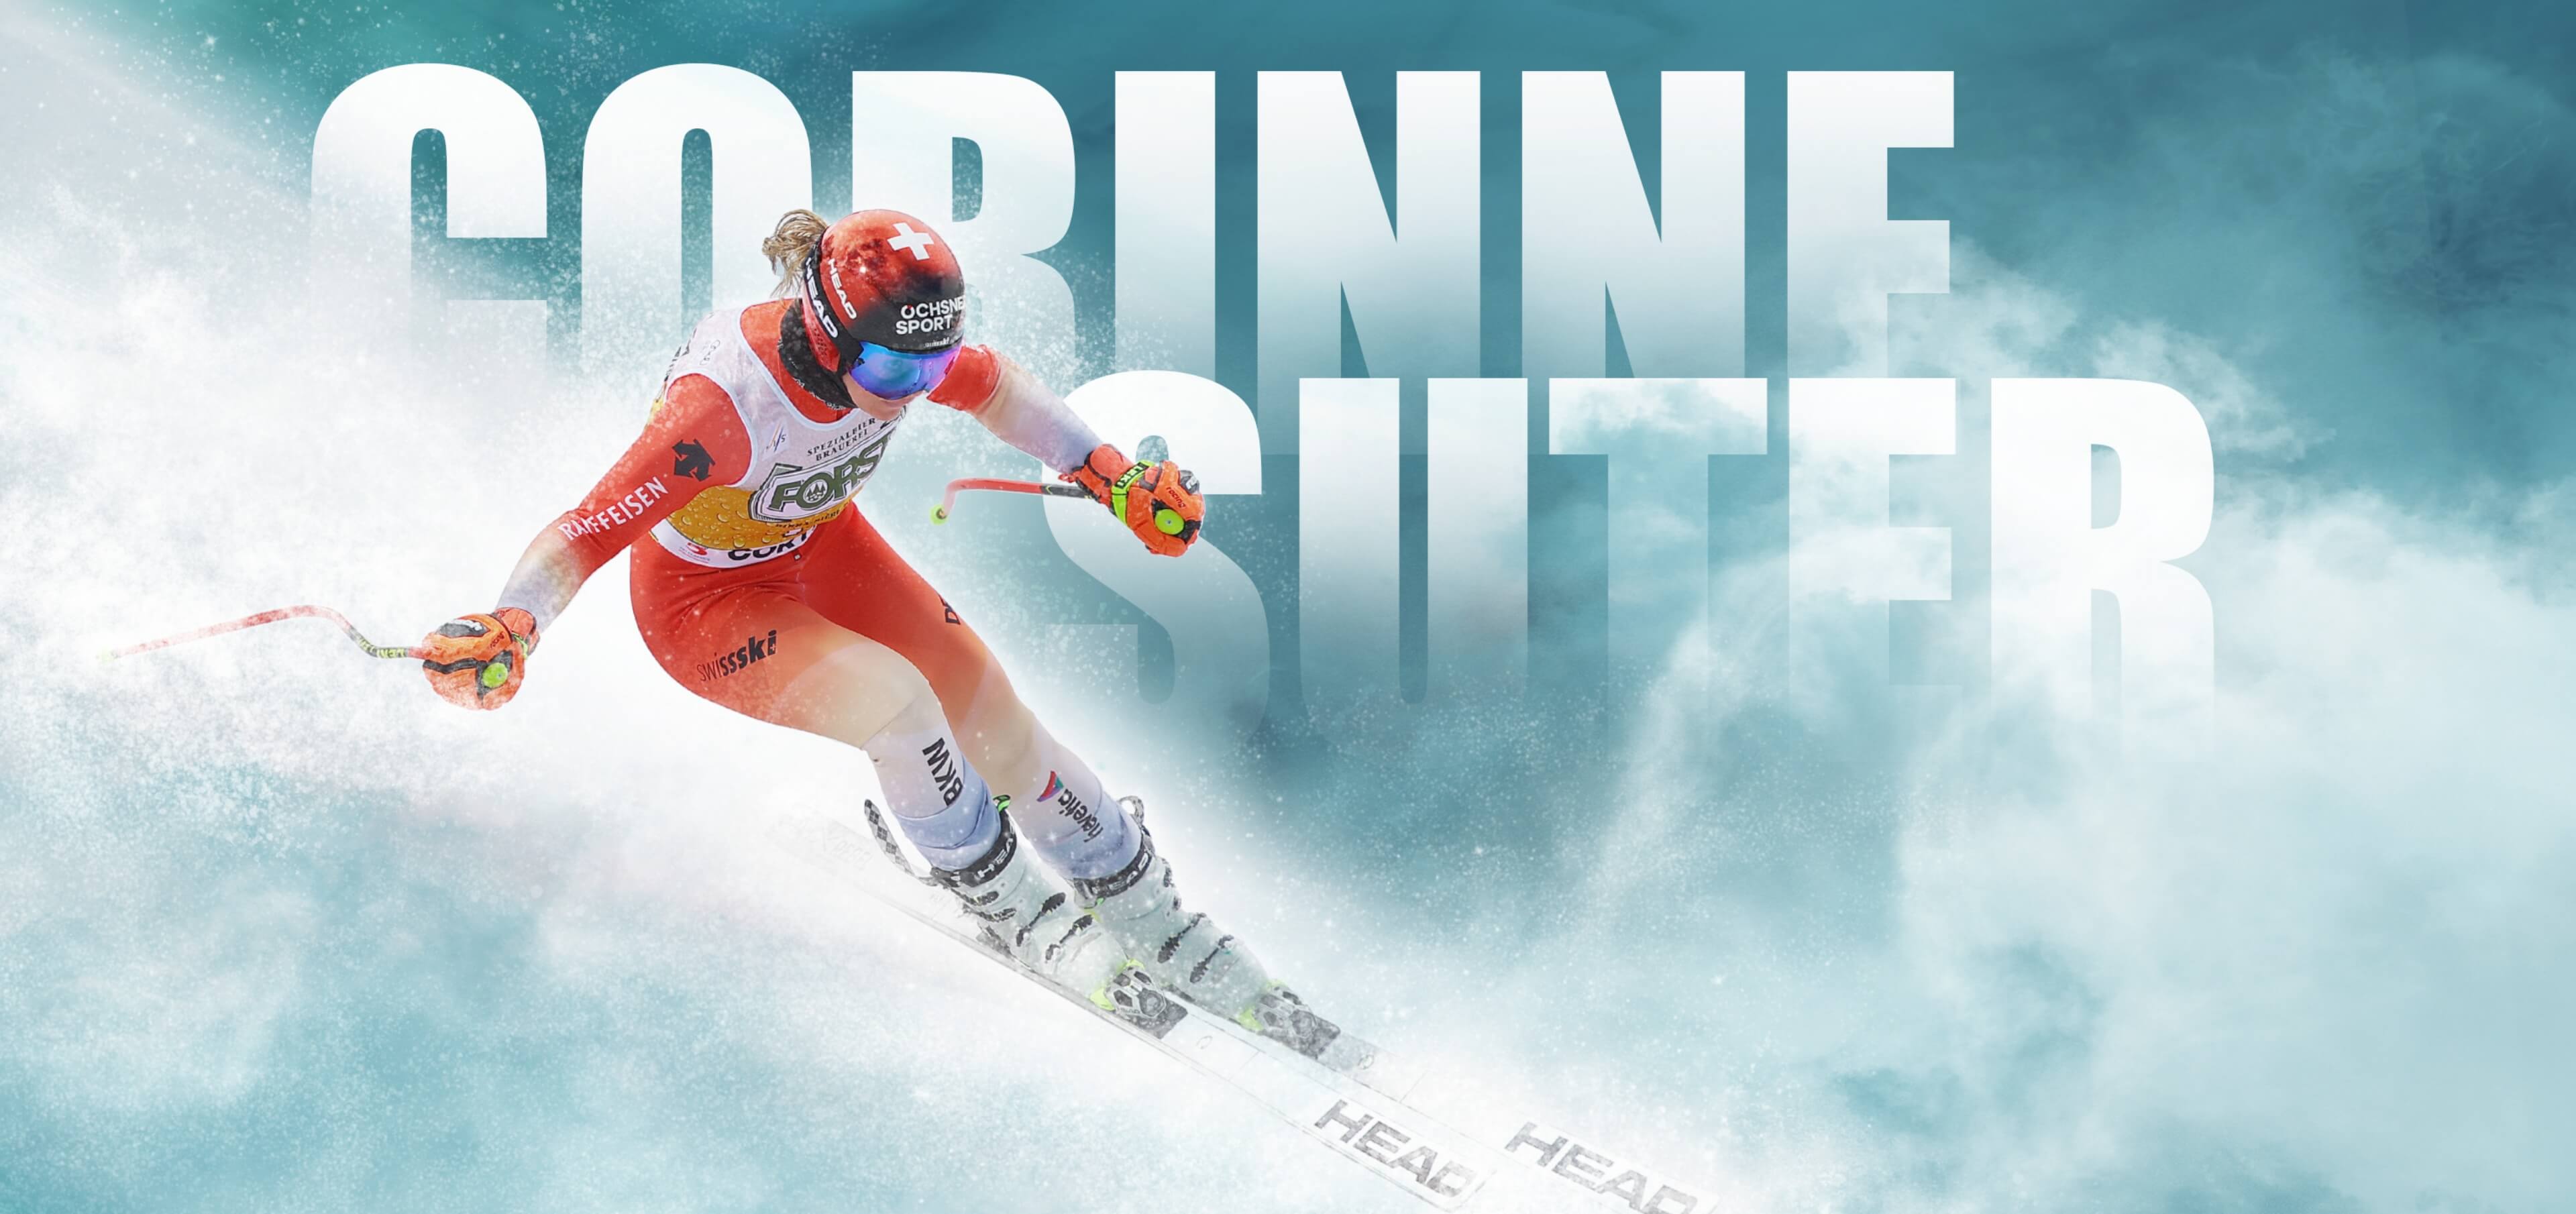 Corinne Suter during a downhill run with writing in the background